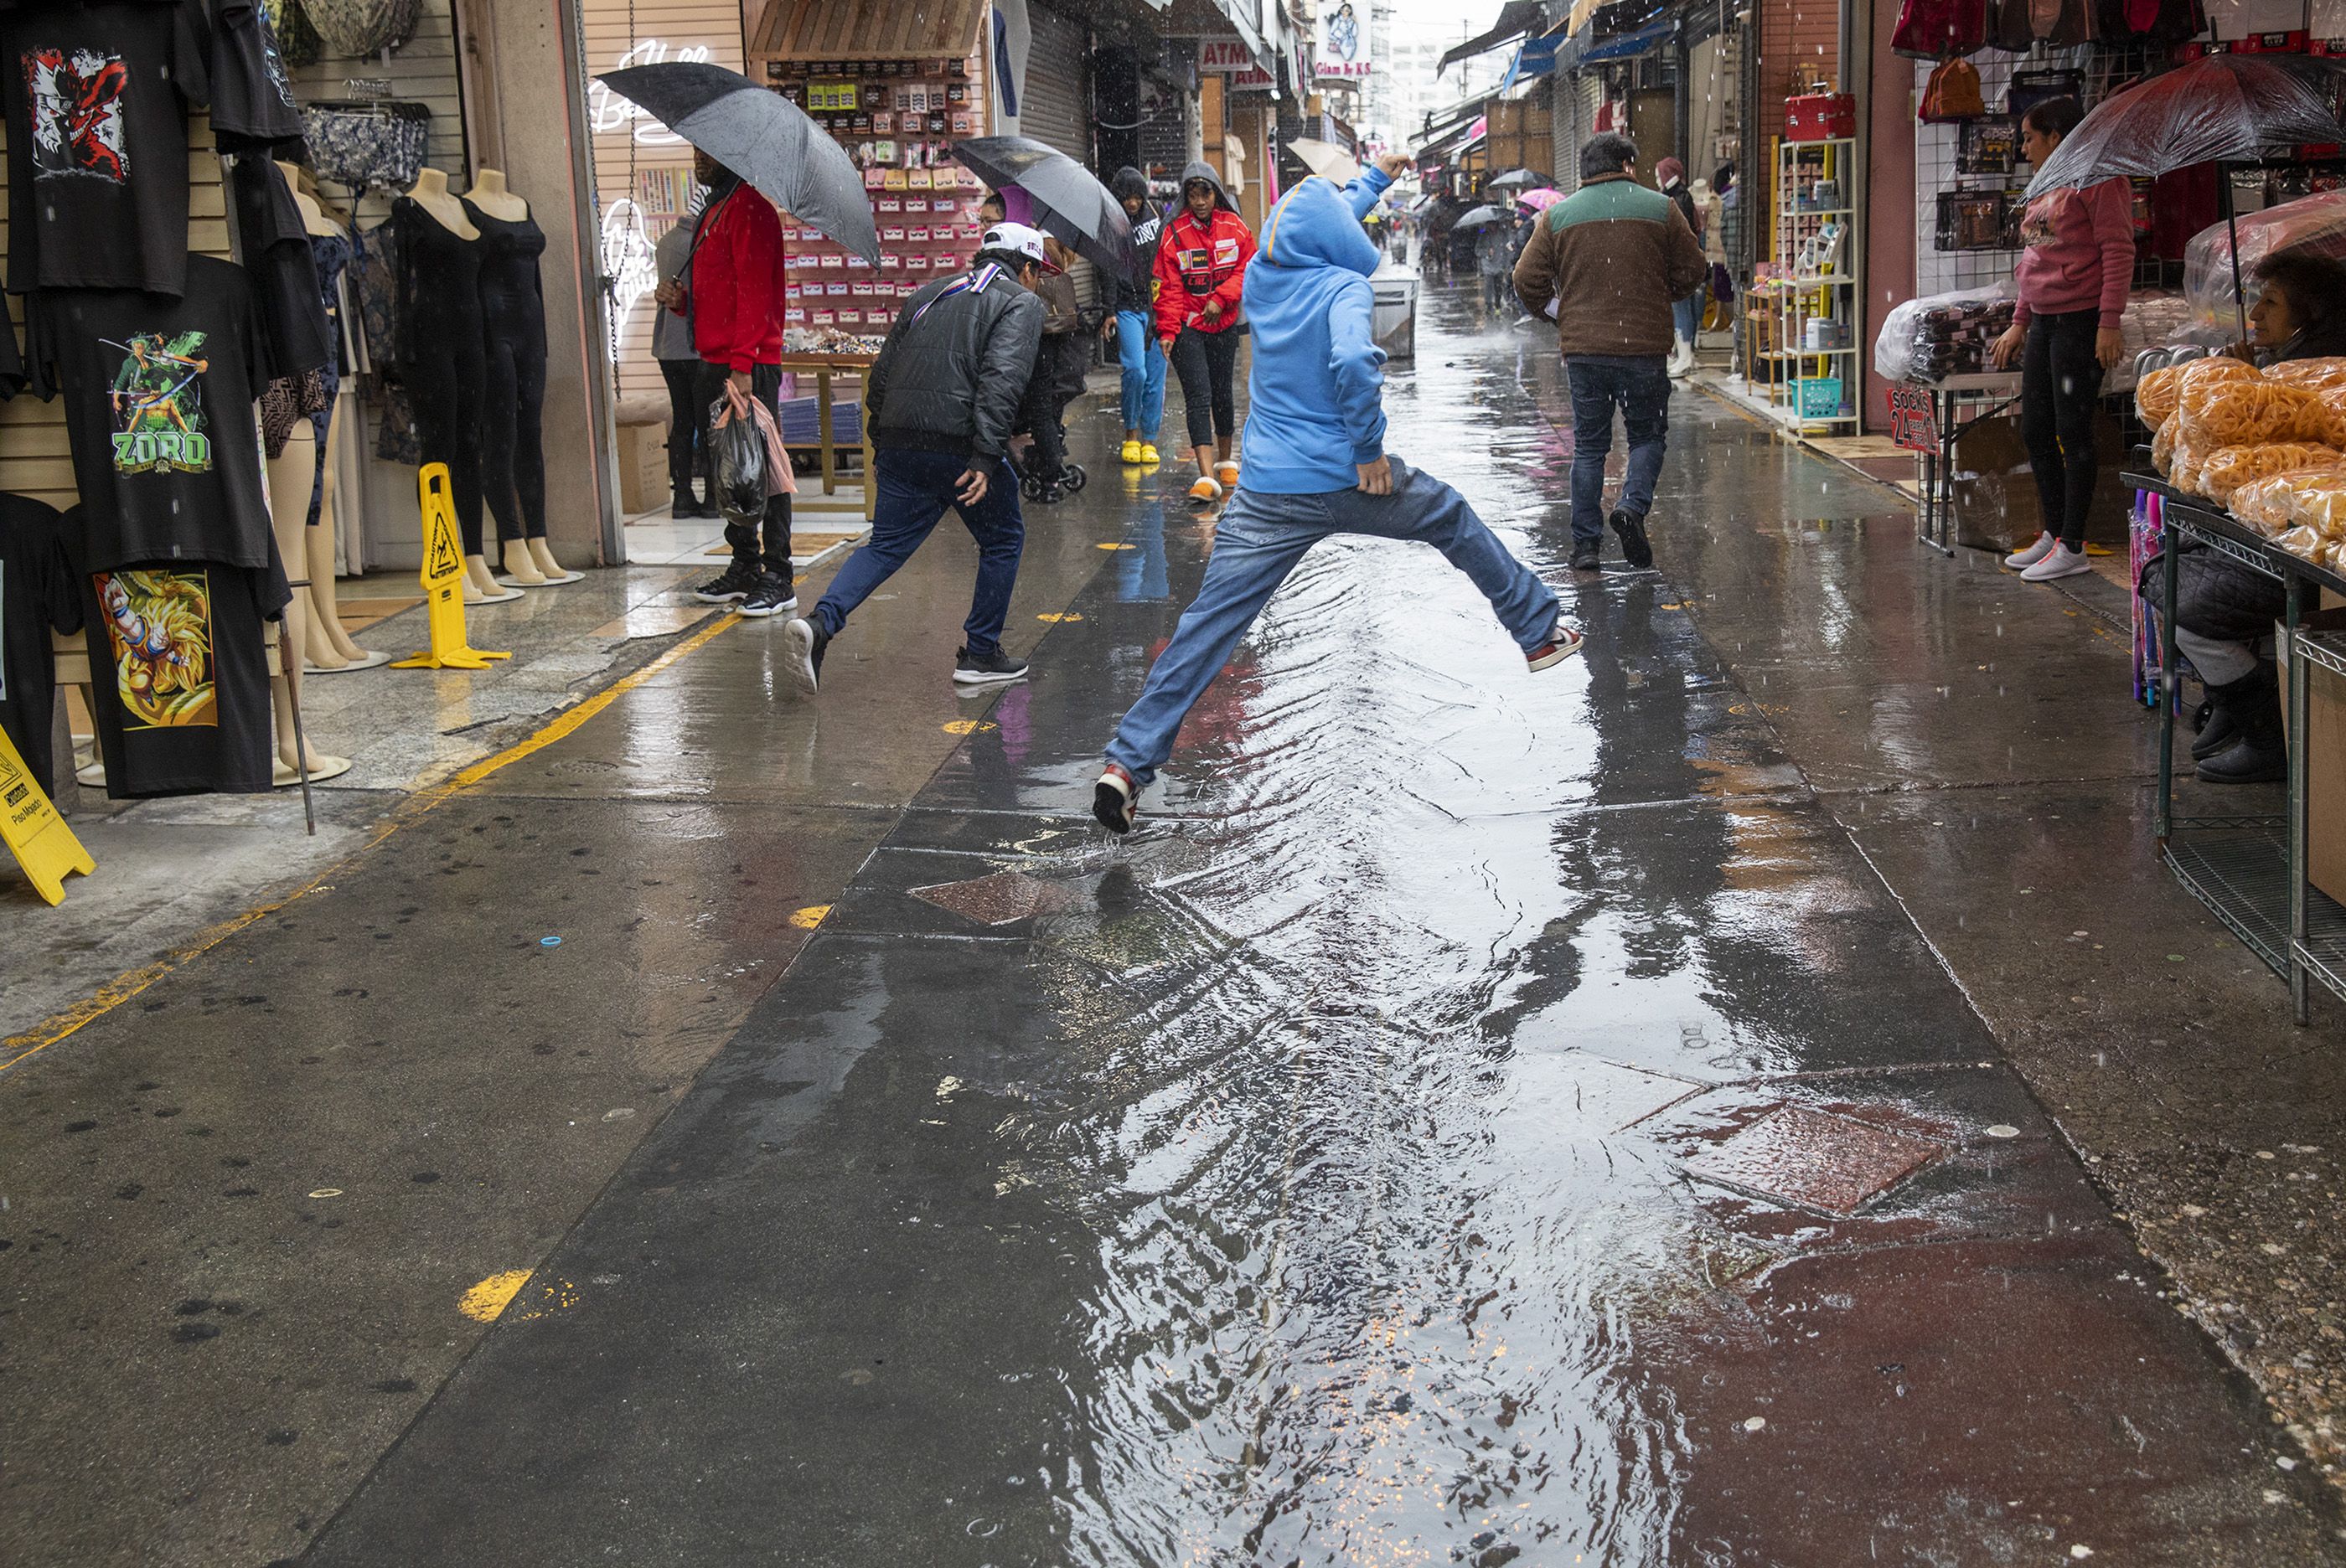 Brayan Suarez leaps to avoid getting wet while crossing to the other side as the rain water builds up on the ground at Santee Alley in Los Angeles. 